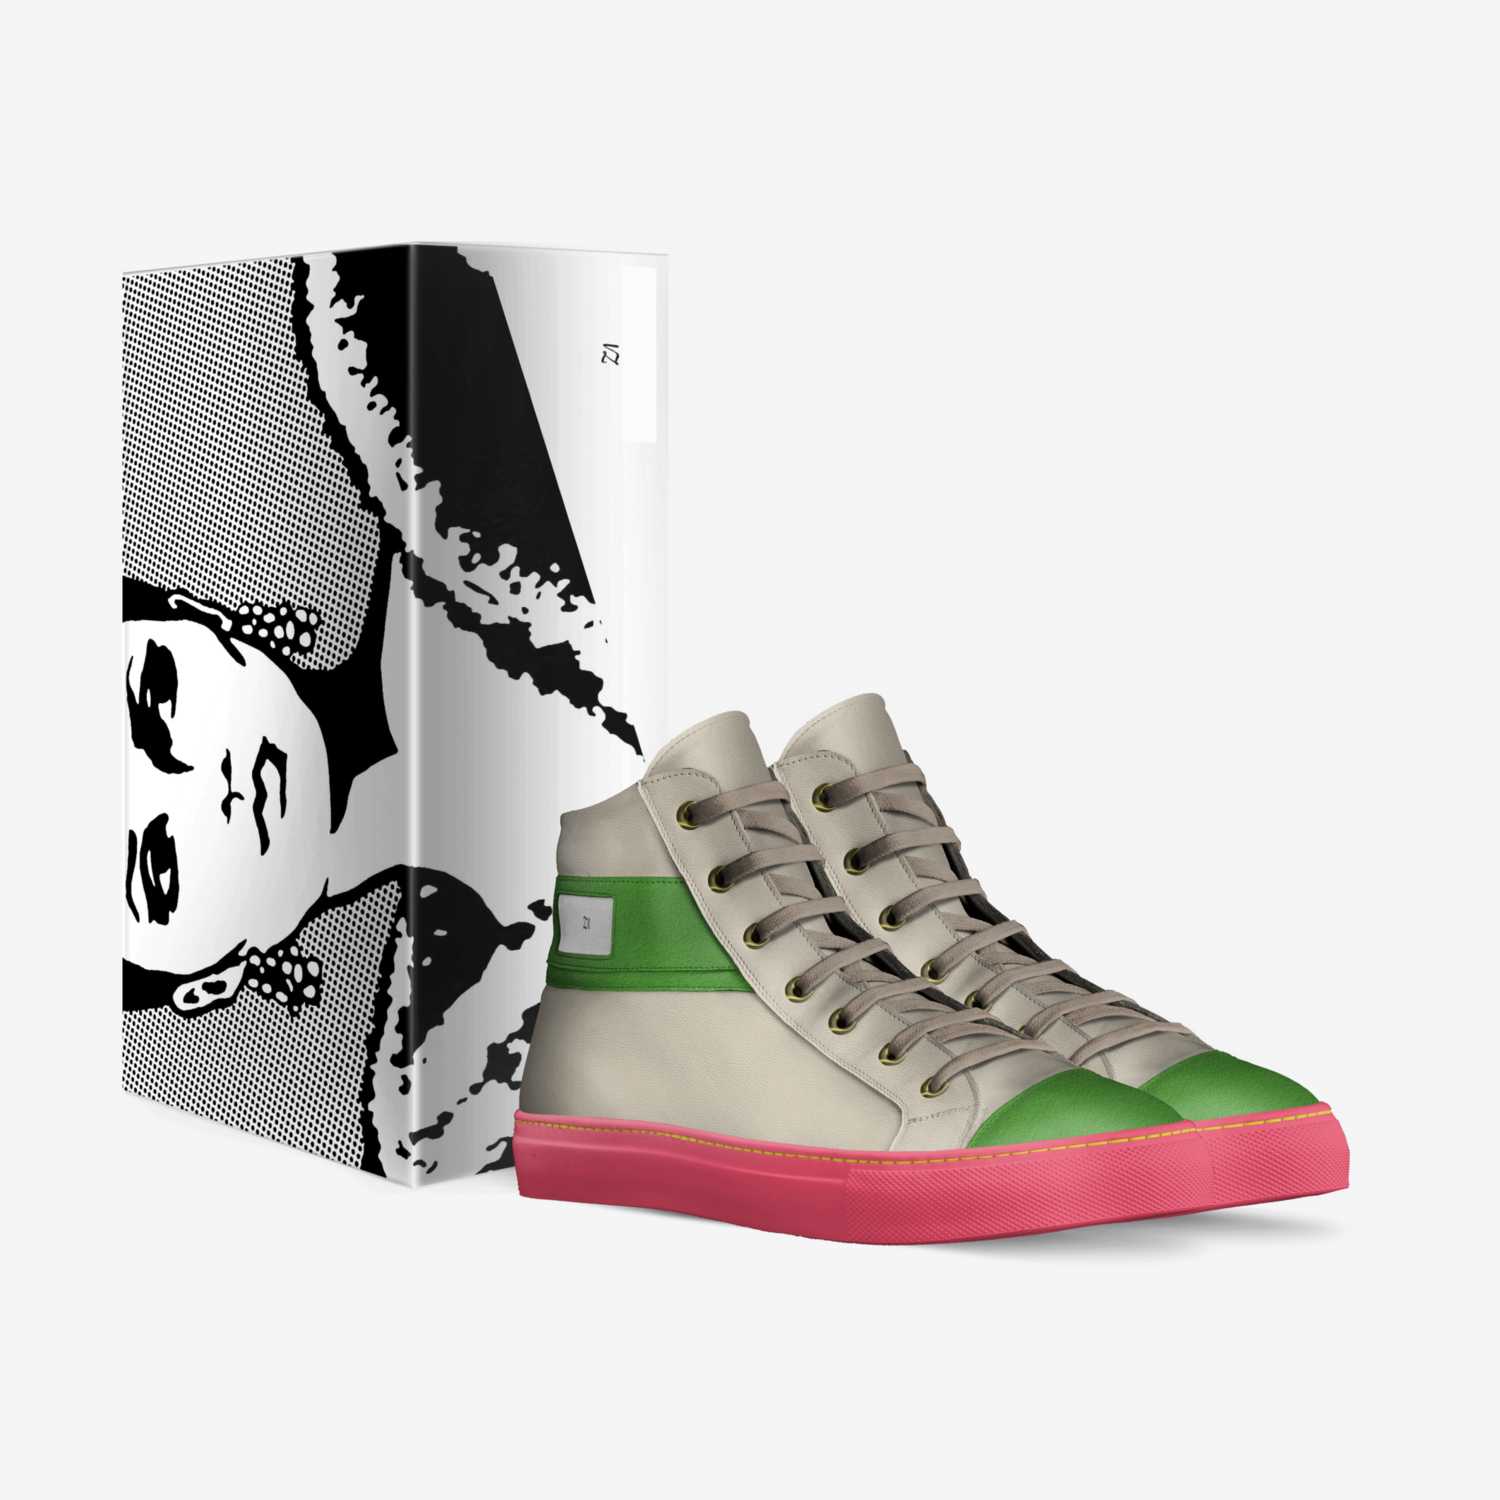 Z1 custom made in Italy shoes by Z Ish | Box view